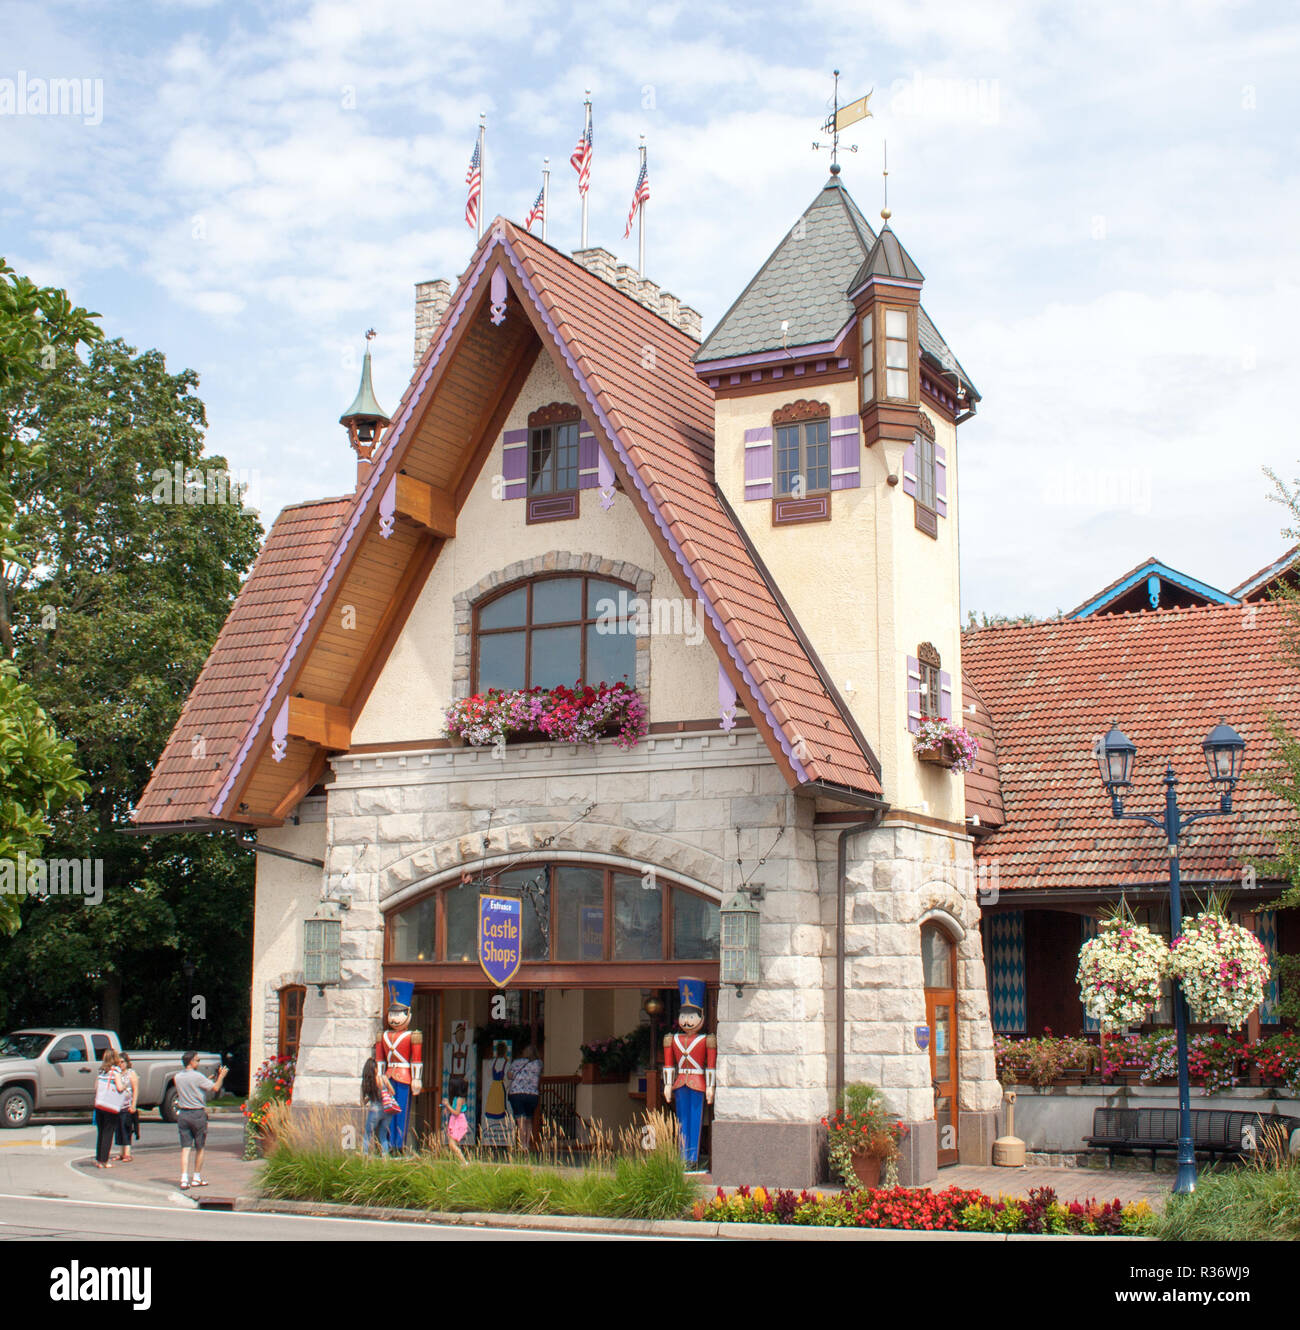 The Castle Shop in Frankenmuth, Michigan Stock Photo